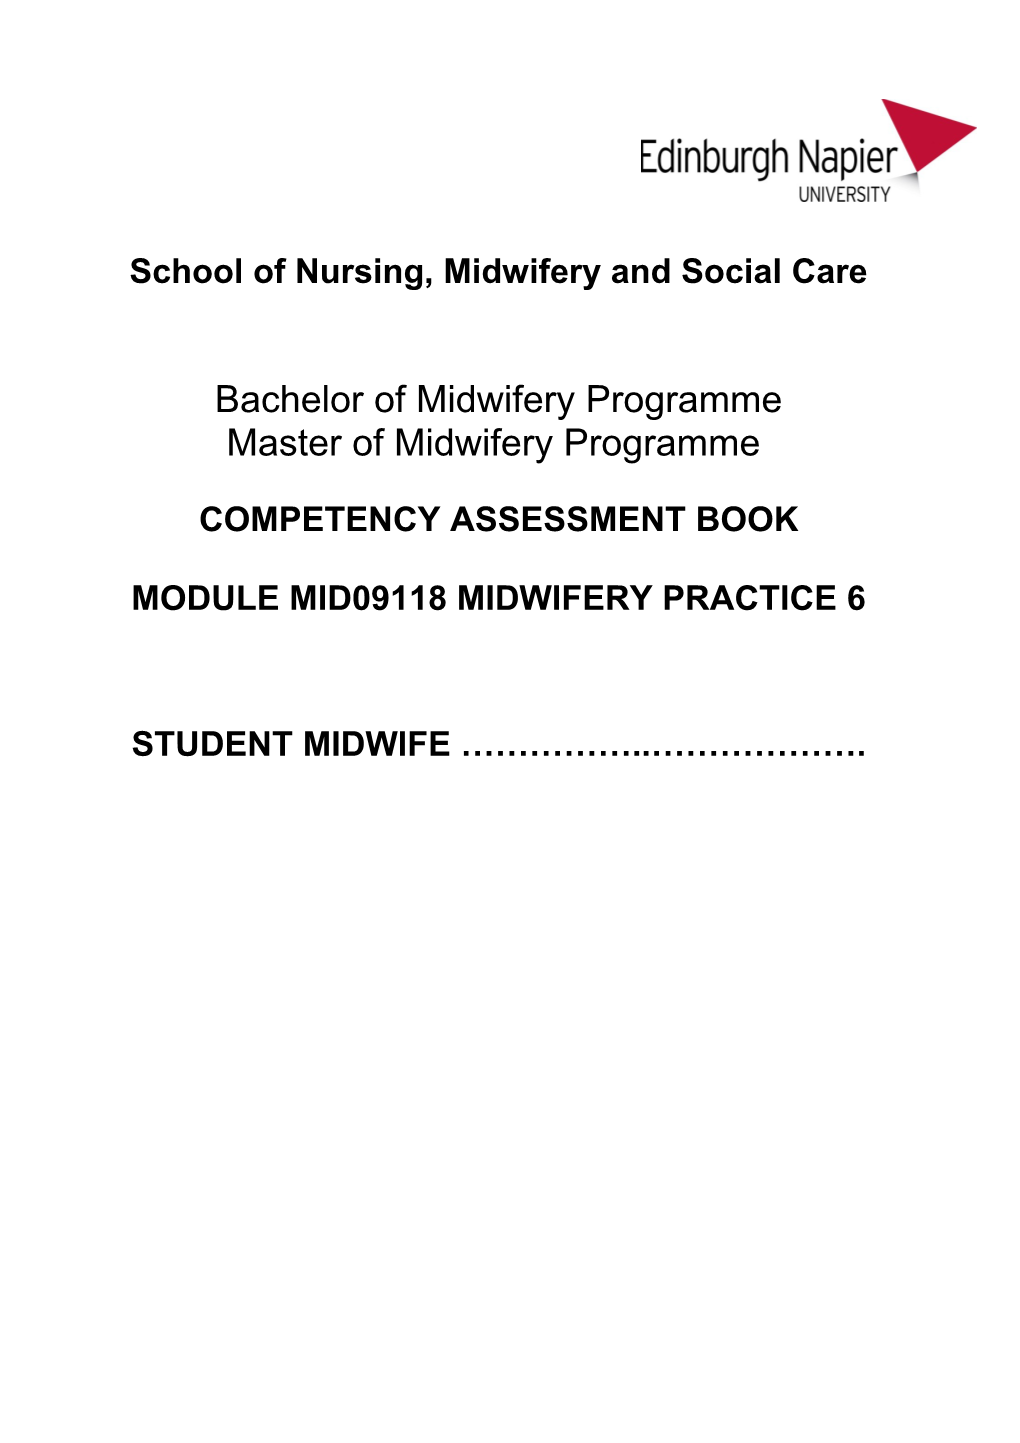 New Curric 2016 Midwifery Practice 6